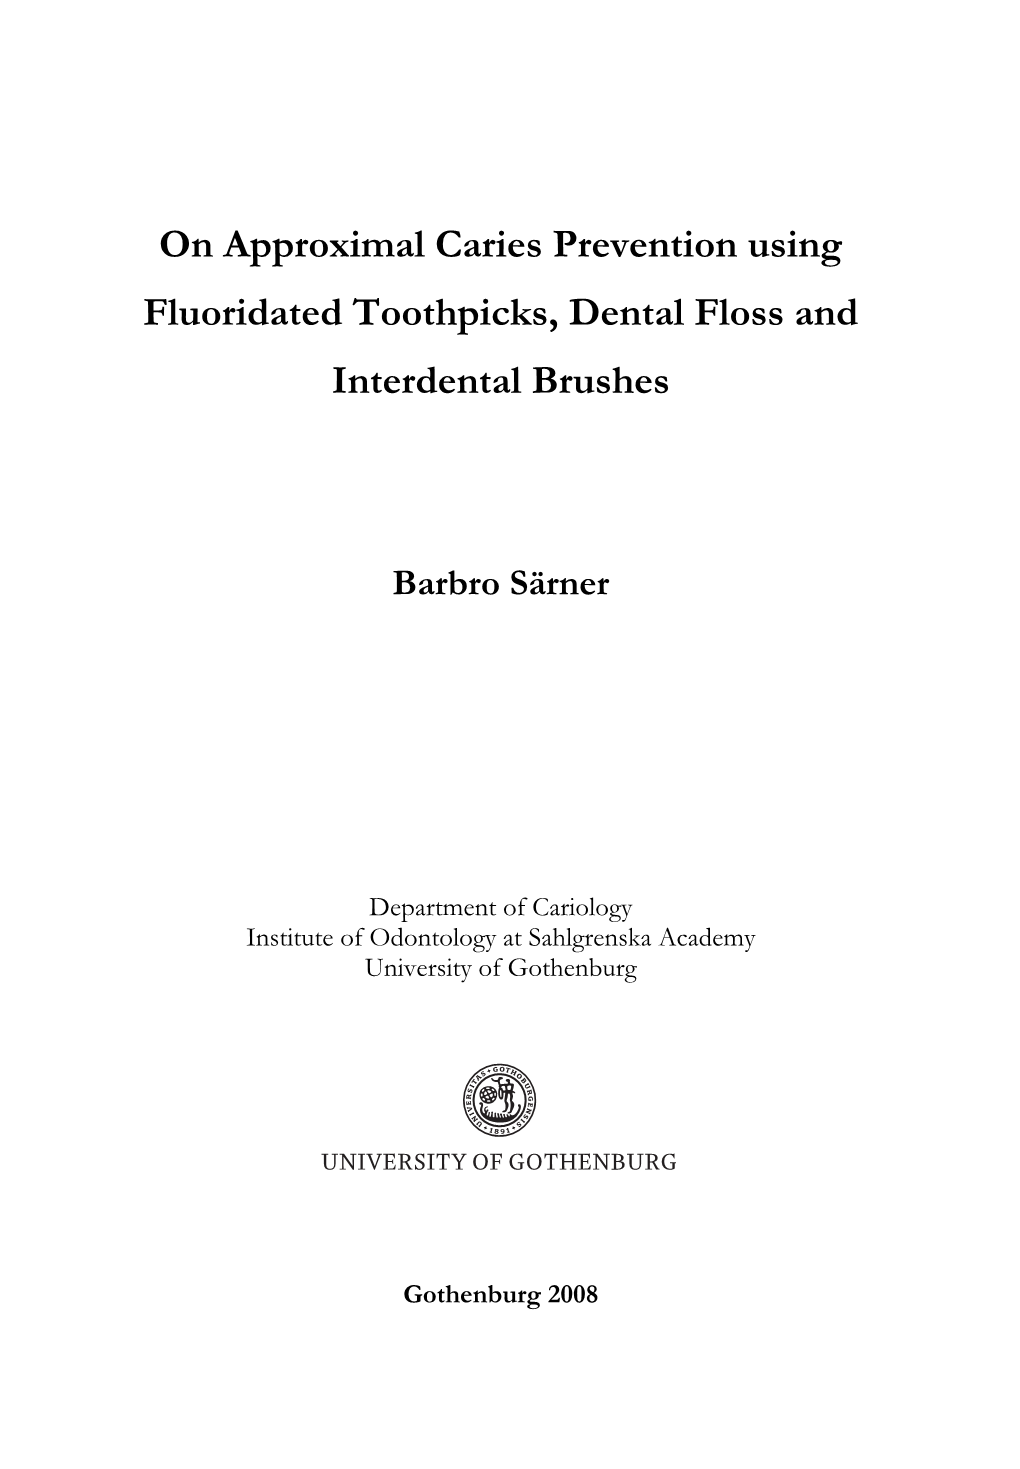 On Approximal Caries Prevention Using Fluoridated Toothpicks, Dental Floss and Interdental Brushes